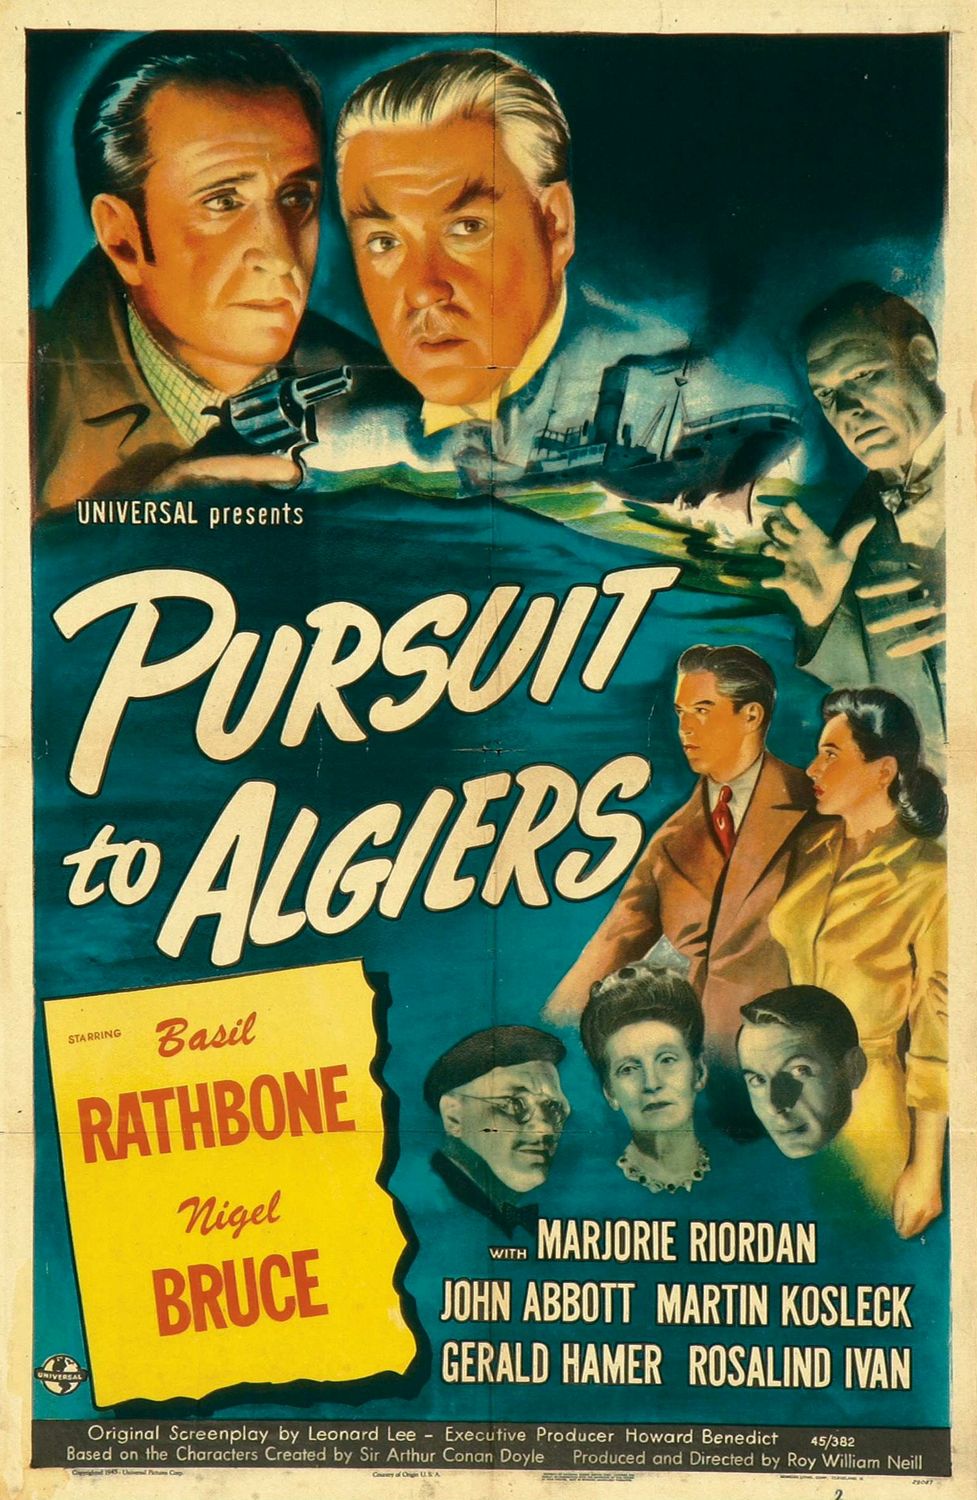 Extra Large Movie Poster Image for Pursuit to Algiers 